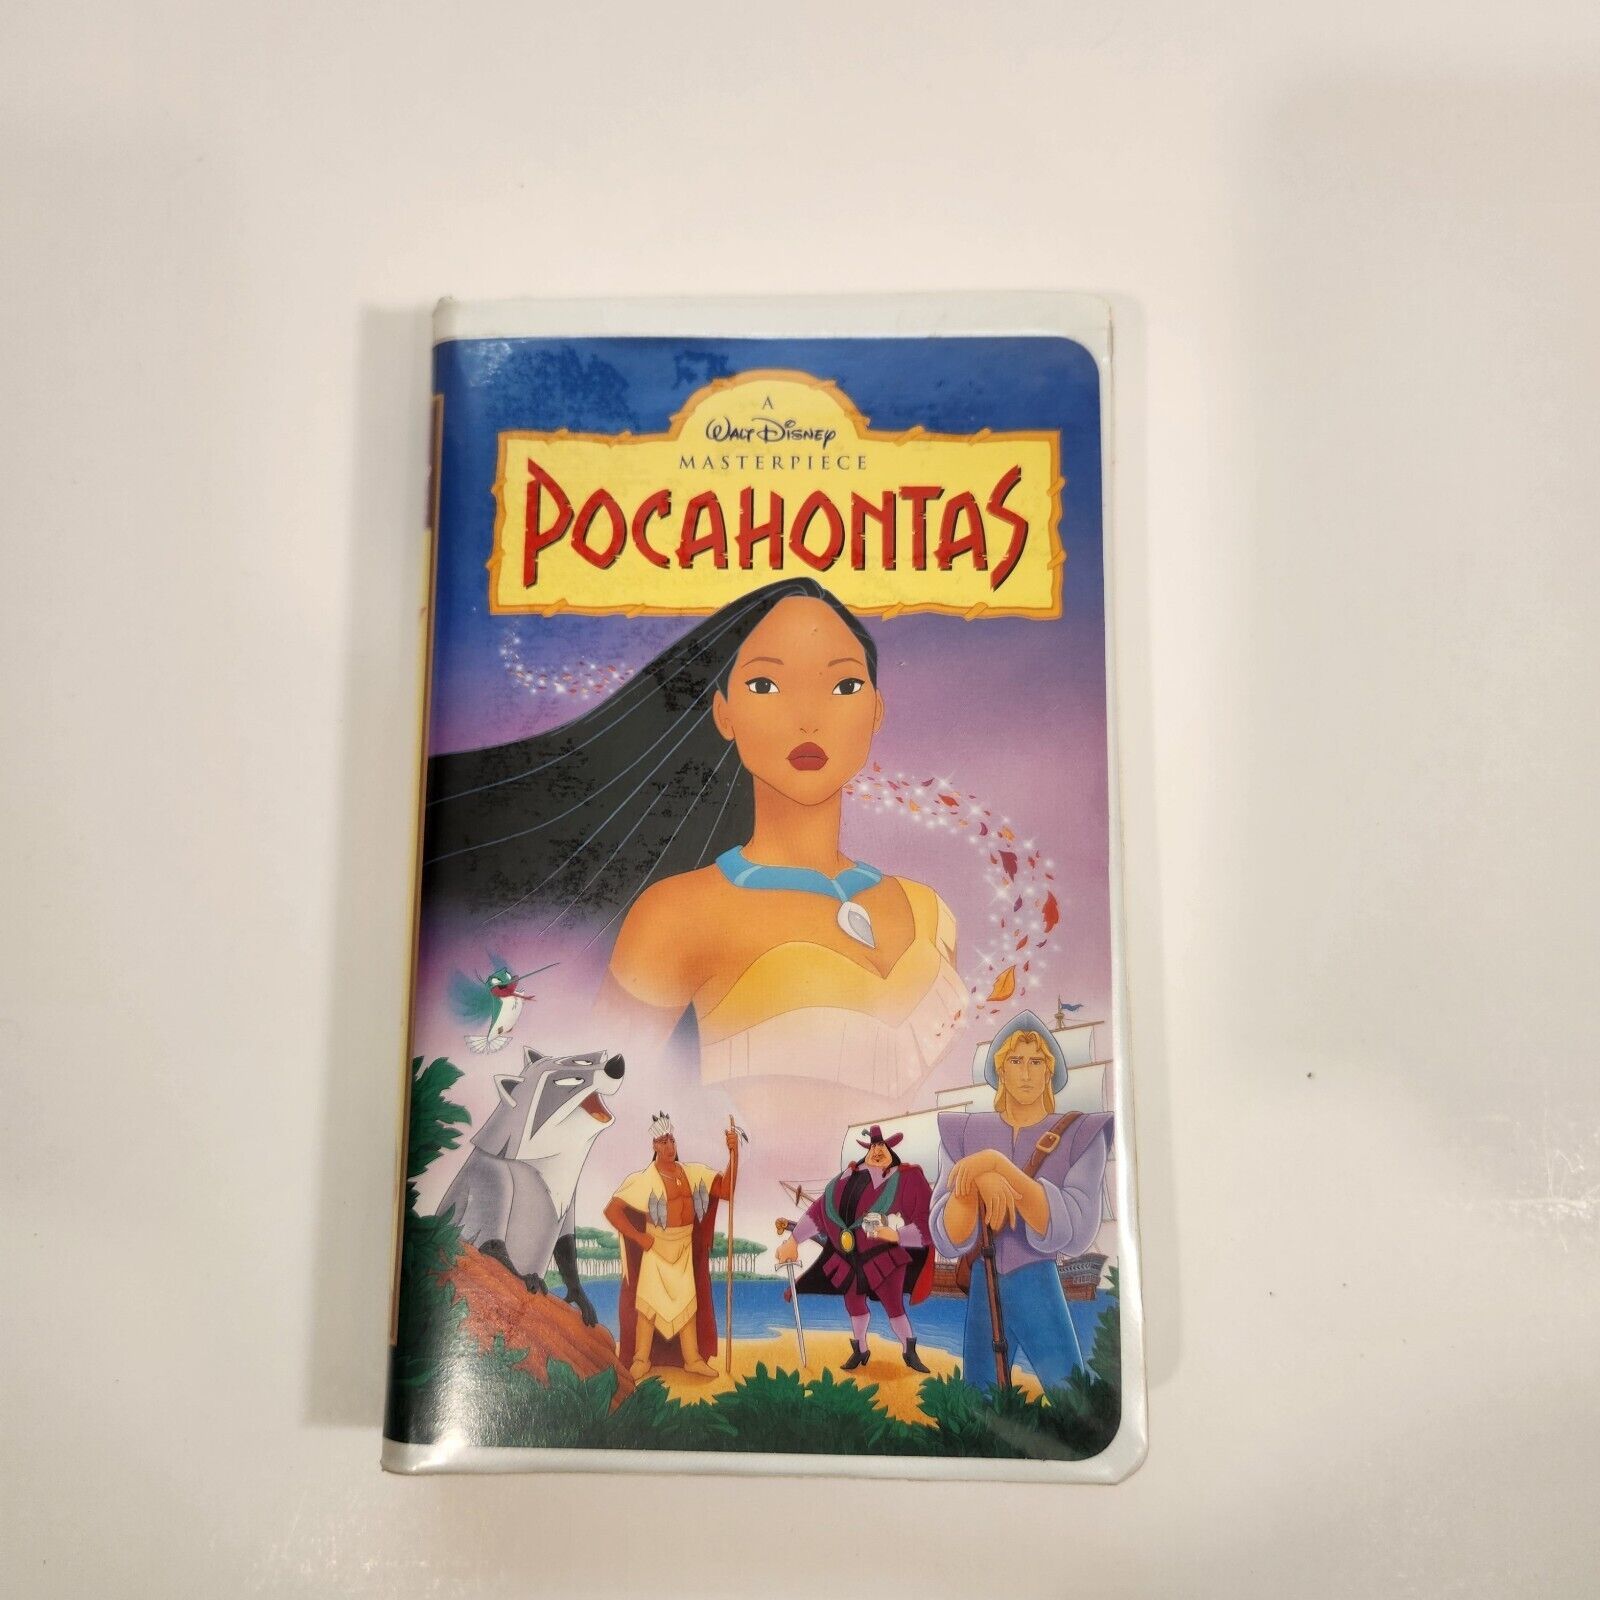 Primary image for Disney "Pocahontas", VHS Tape, Color, 1996 - Preowned, Animated